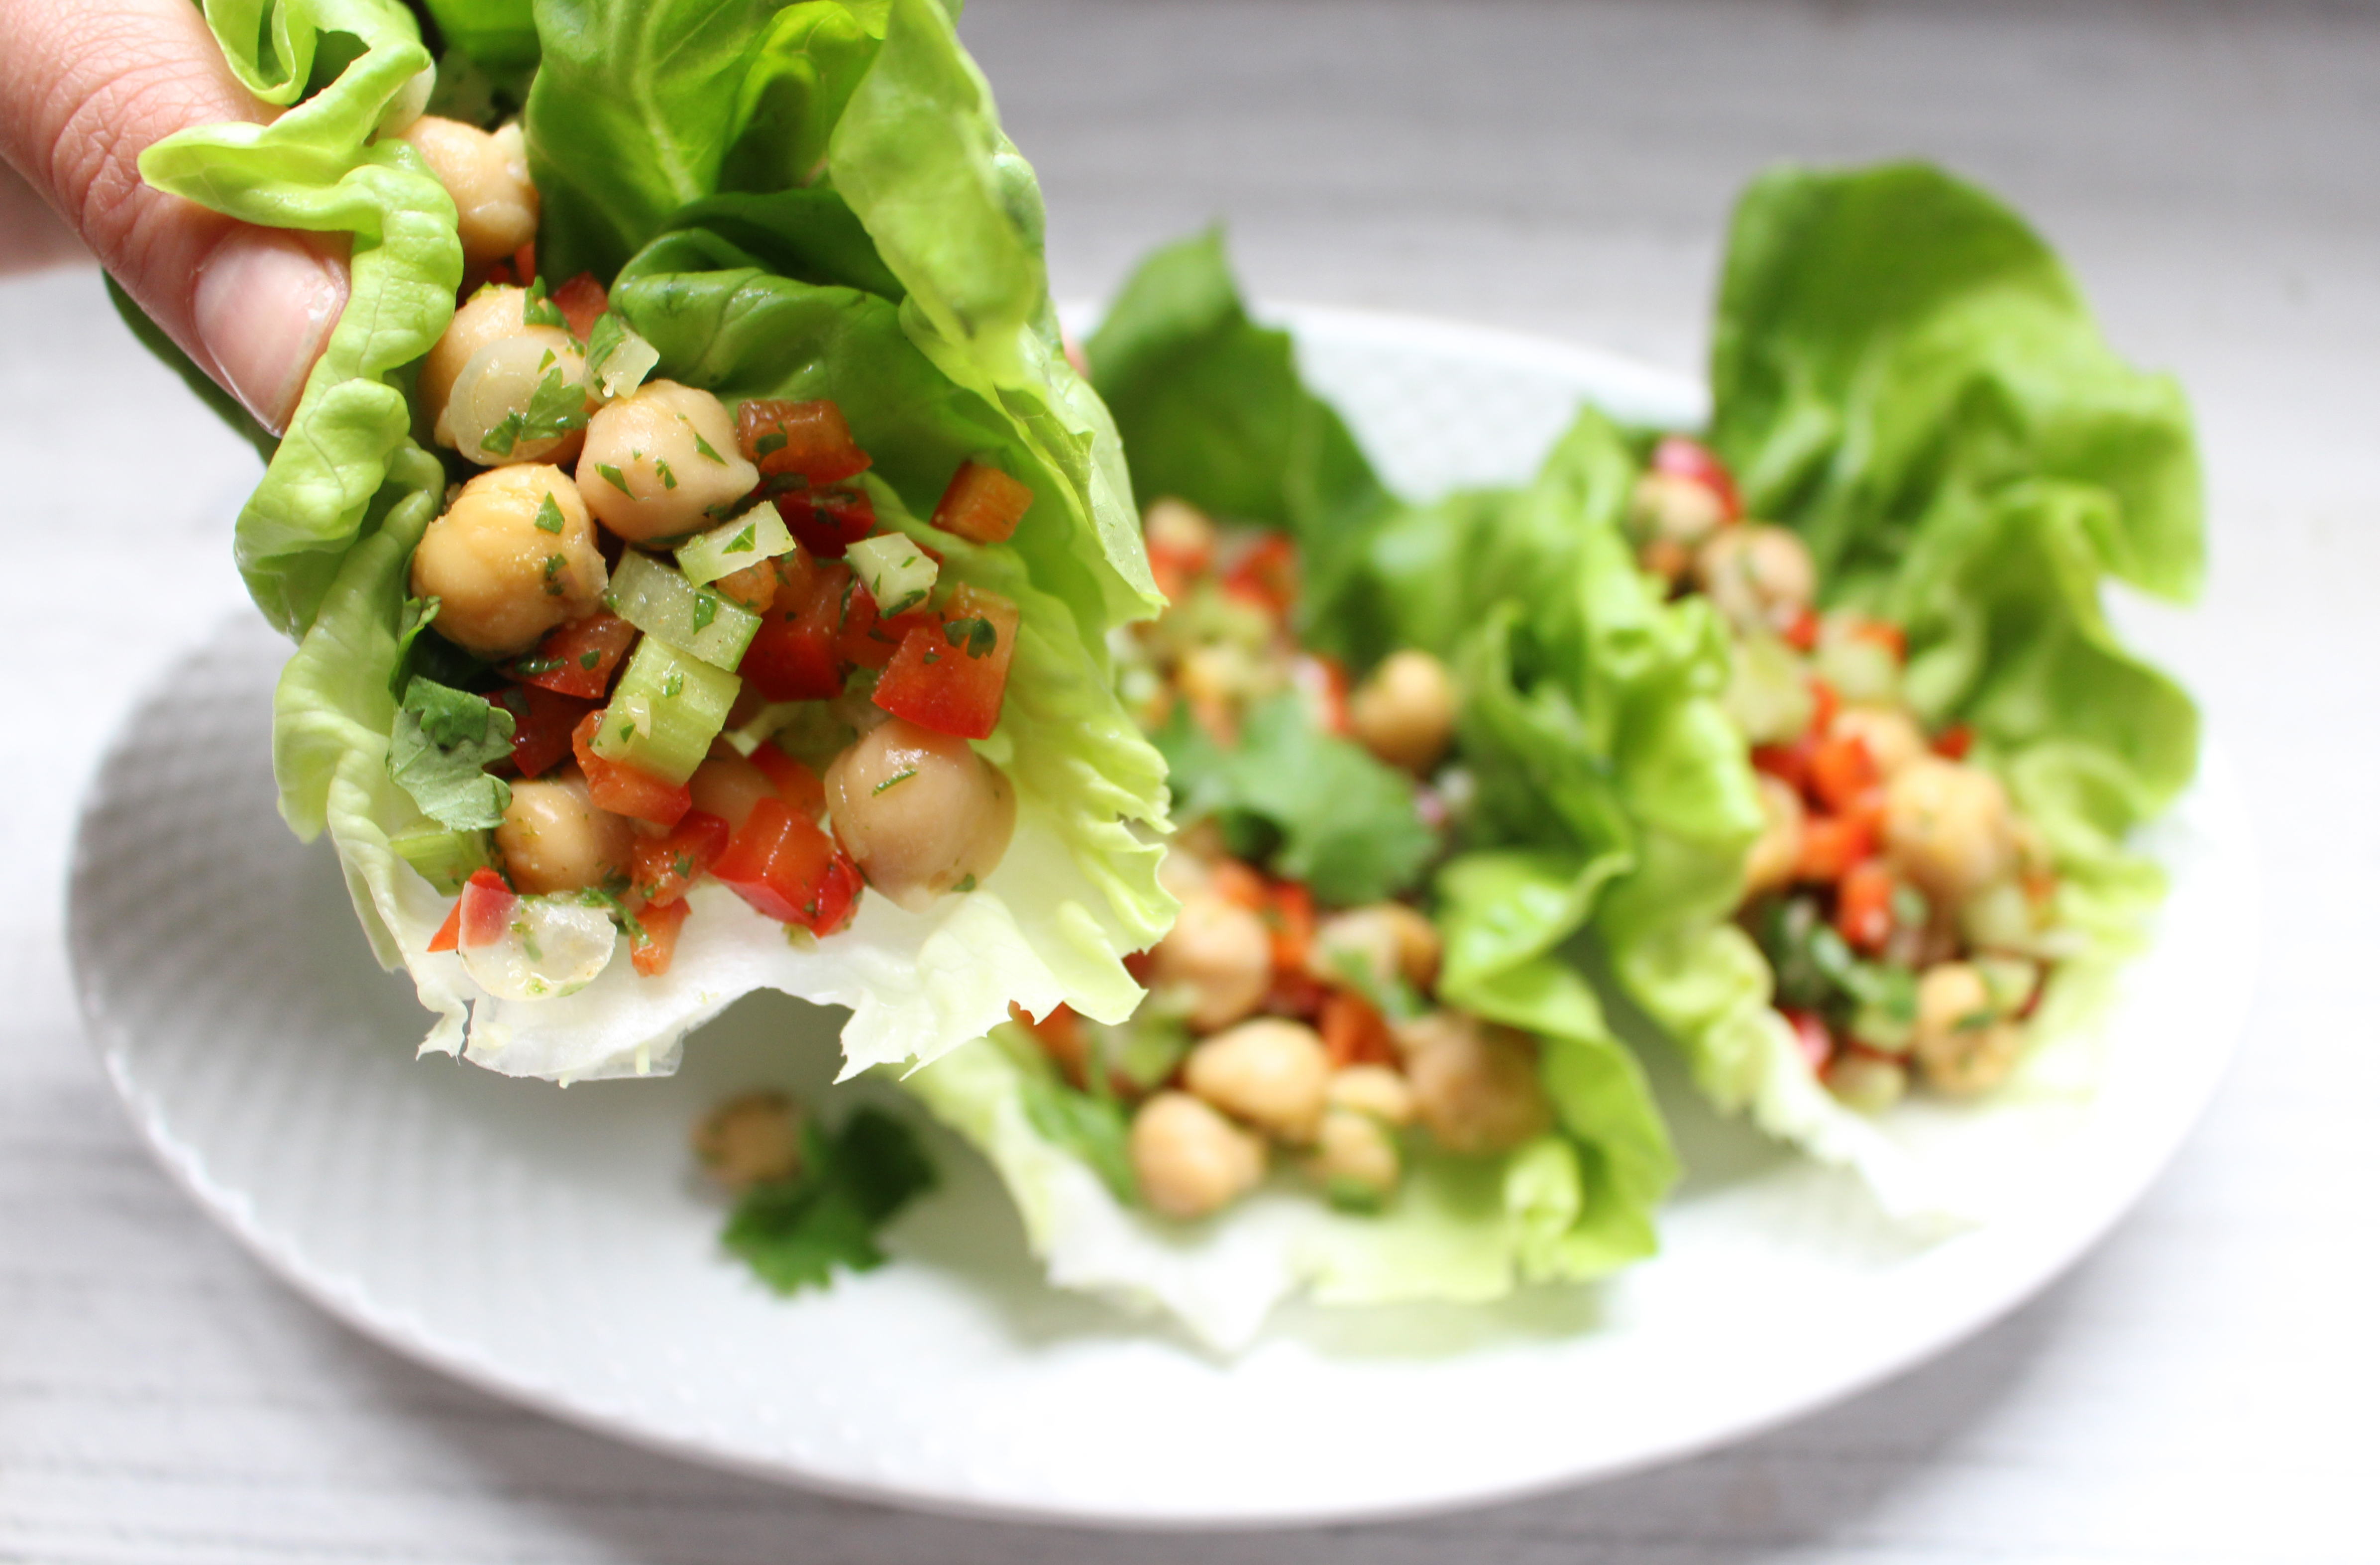 The perfectly crunchy salad that can be served by itself, in lettuce wraps, or with chips!